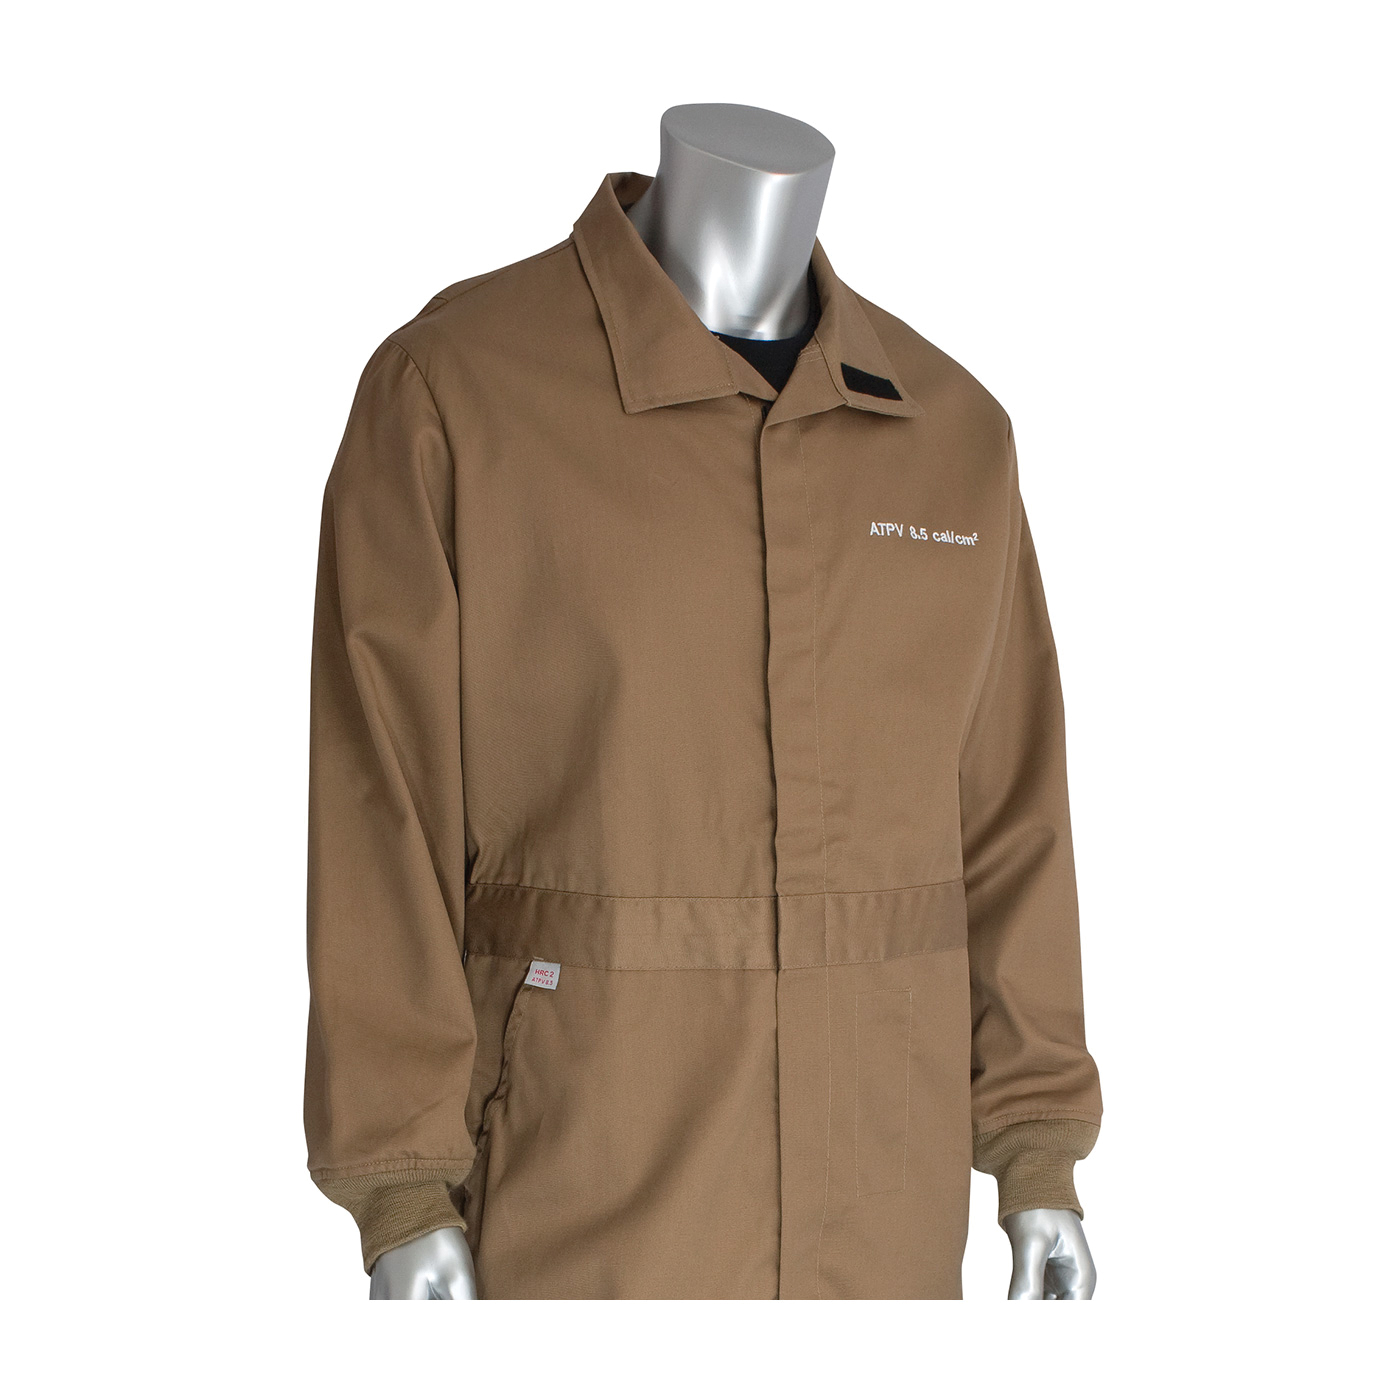 PIP® 9100-2110D/4X Flame Resistant Coverall With Insect Repellant, 4XL, Khaki, 90% Cotton/10% Nylon/FR and Bug Repellent Twill Weave, 60 to 62 in Chest, 32 in L Inseam